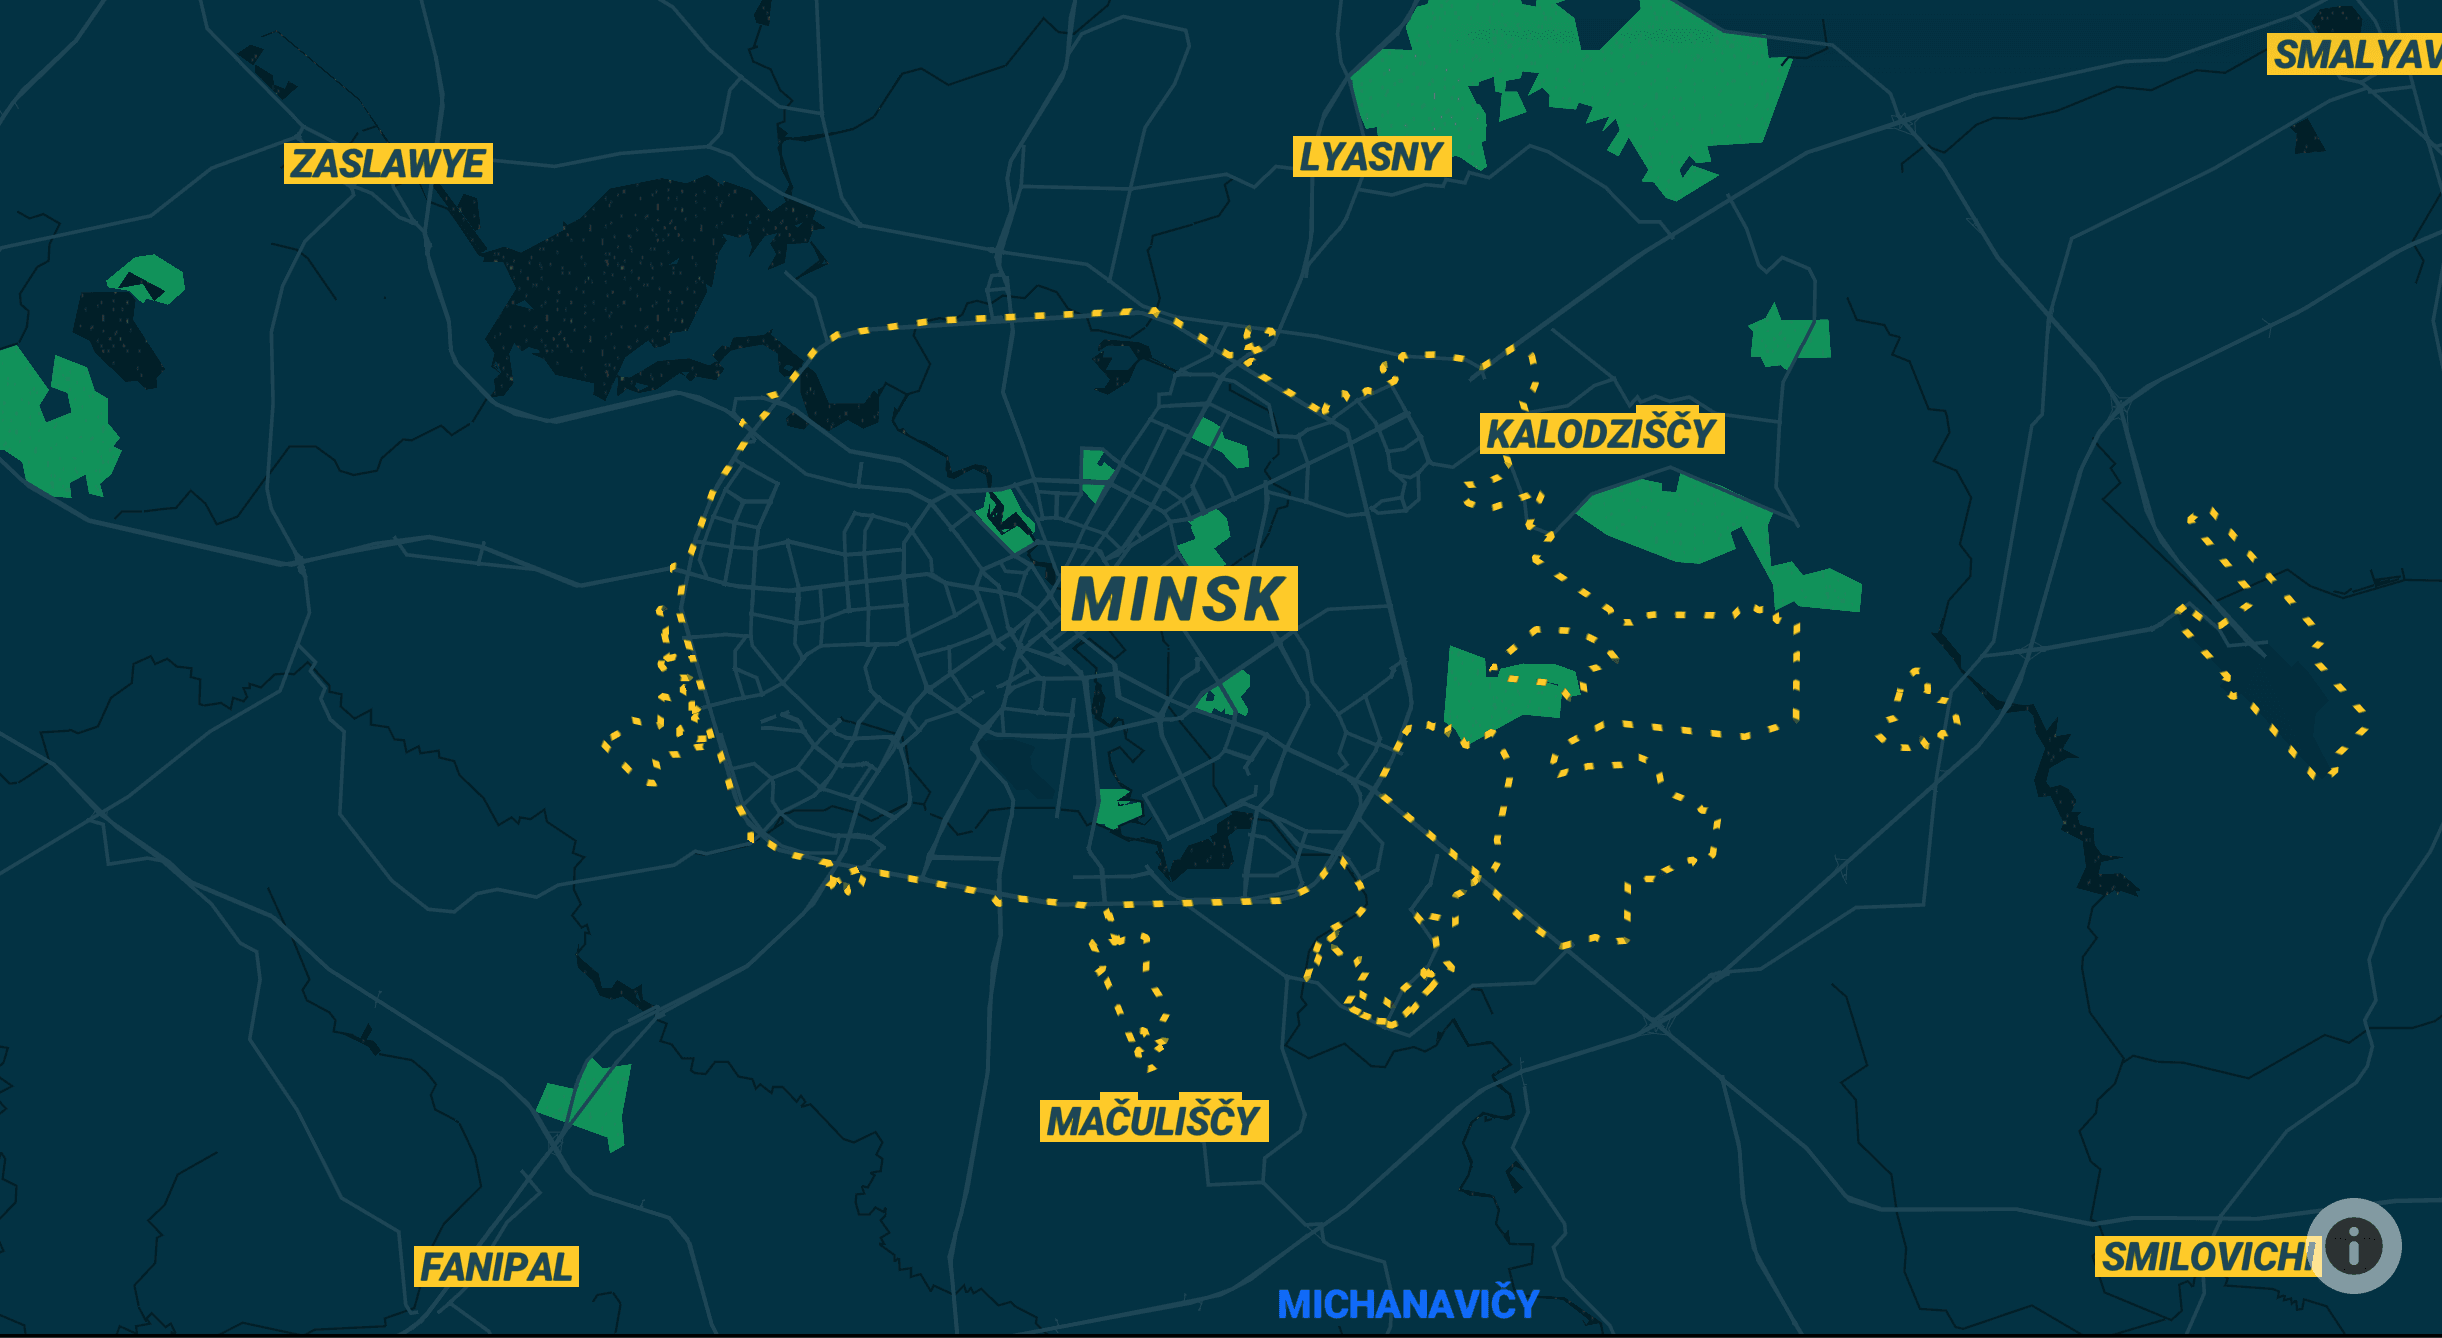 Mapbox_map_styles_Misnk_in_Label_style_88600ed0ff.png?